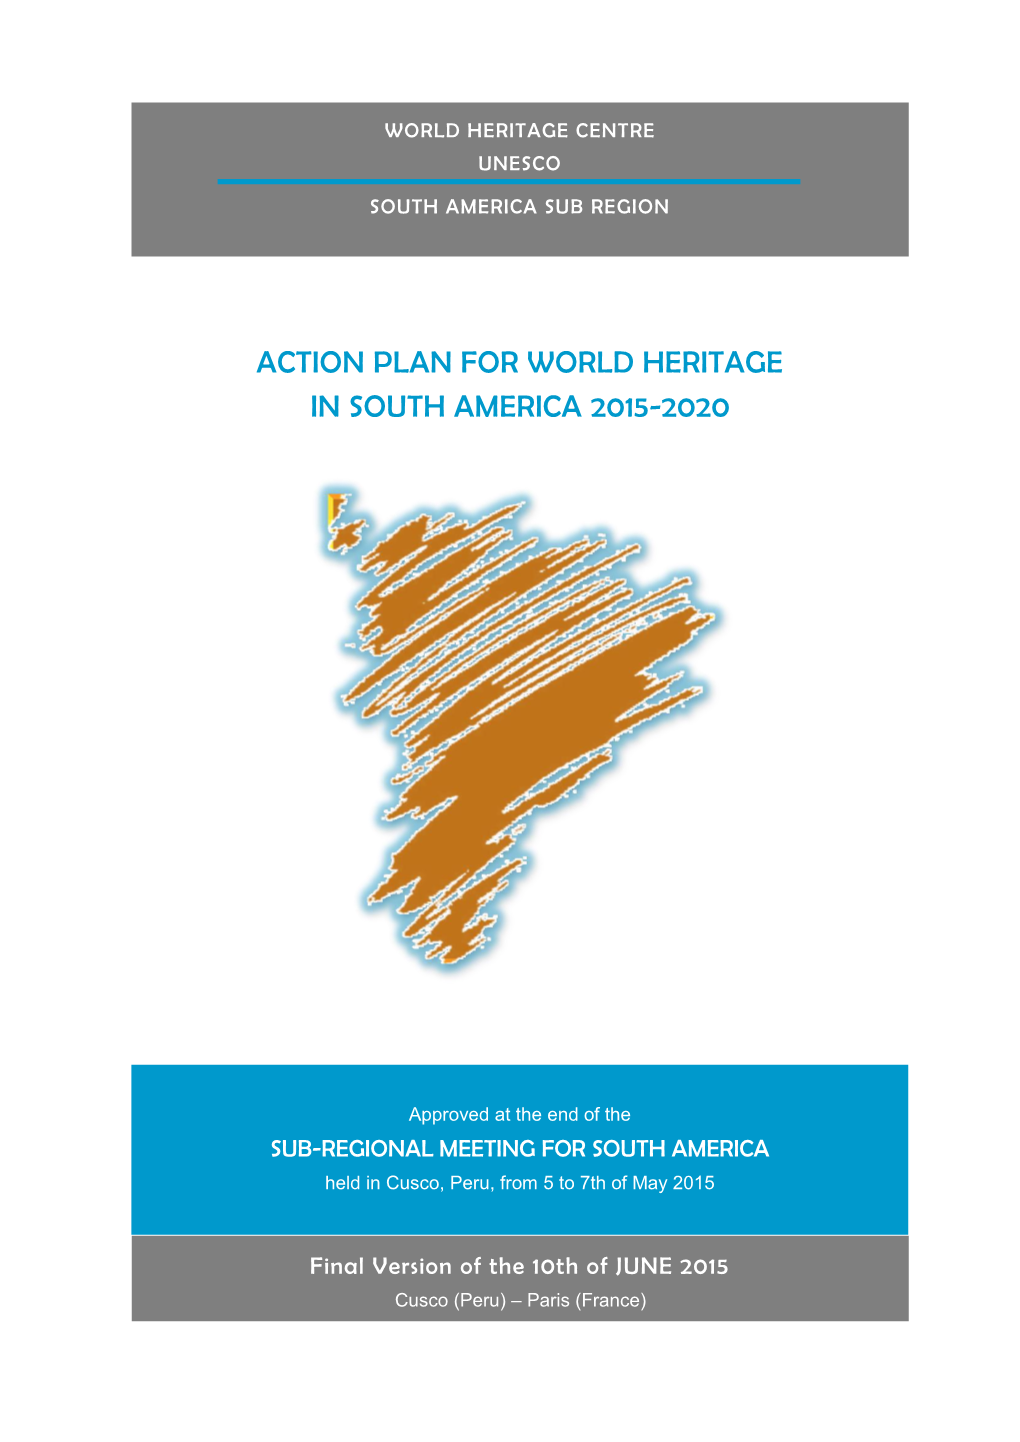 Action Plan for World Heritage in South America 2015-2020